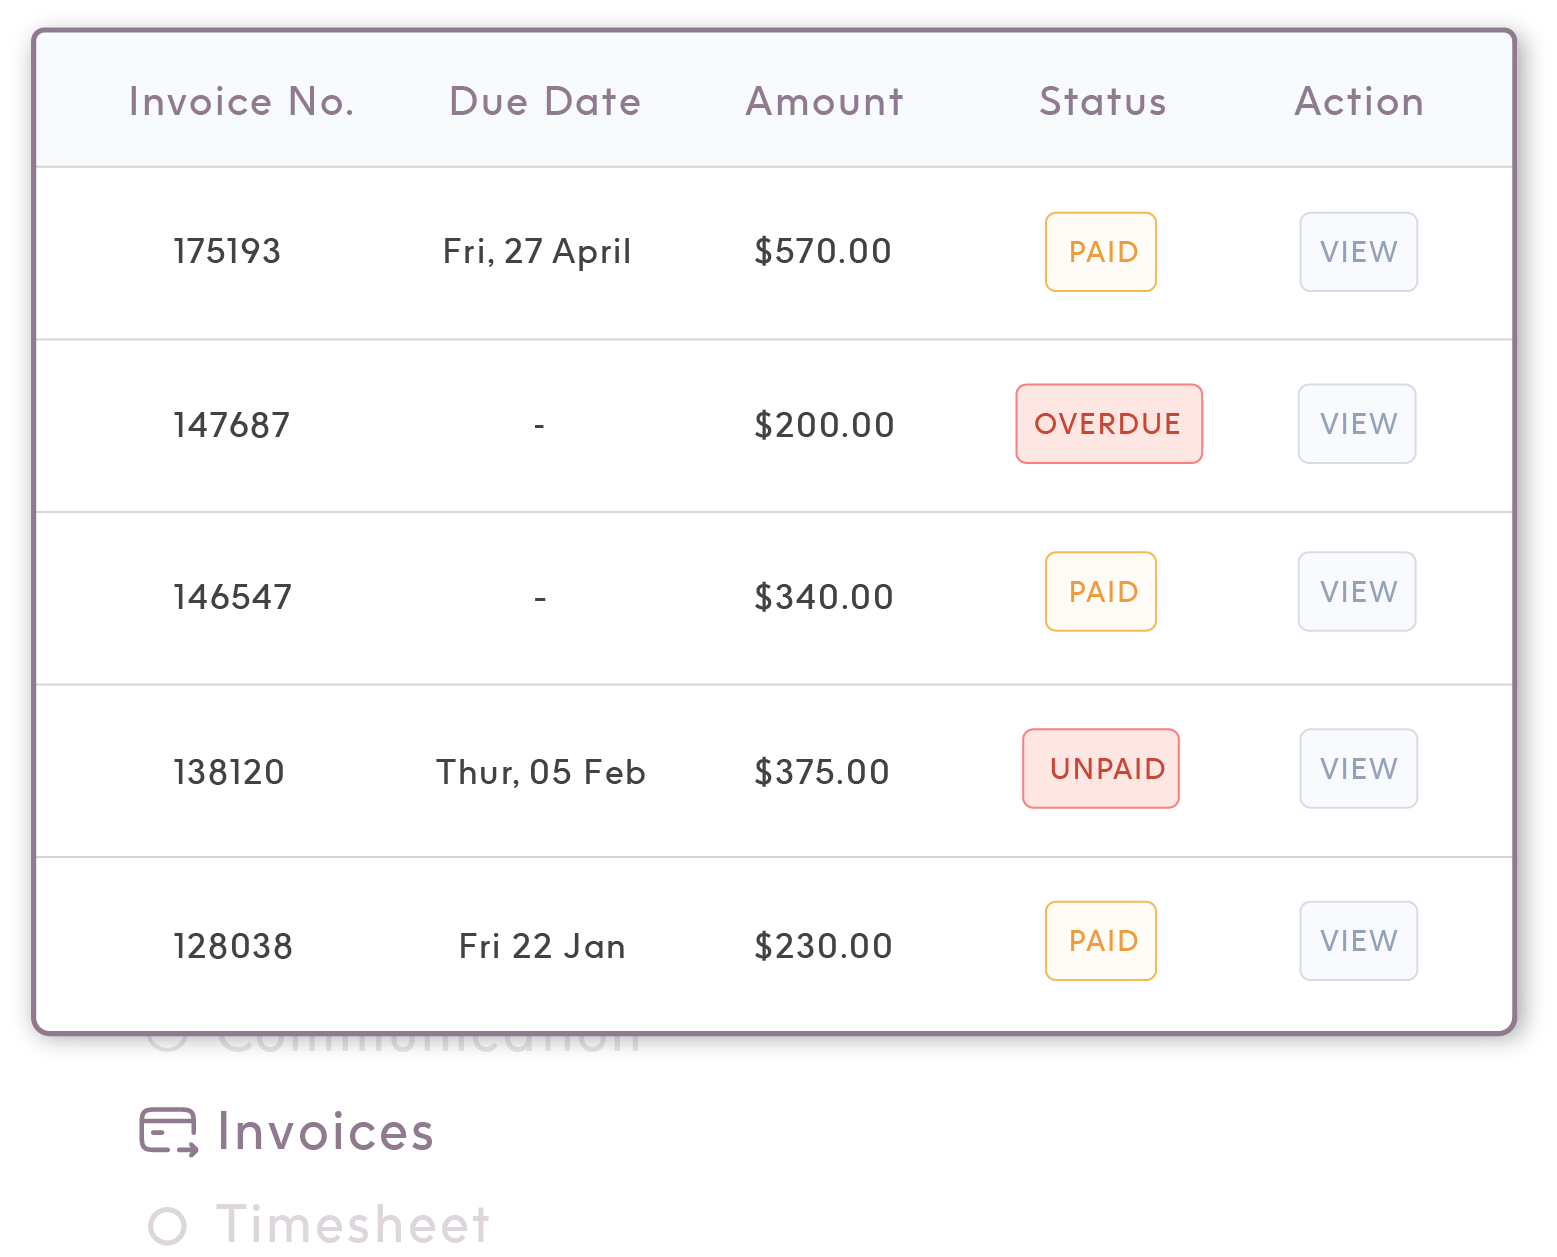 ShiftCare invoicing table showing a client's invoice due dates, invoice numbers, amount, payment status, and action buttons